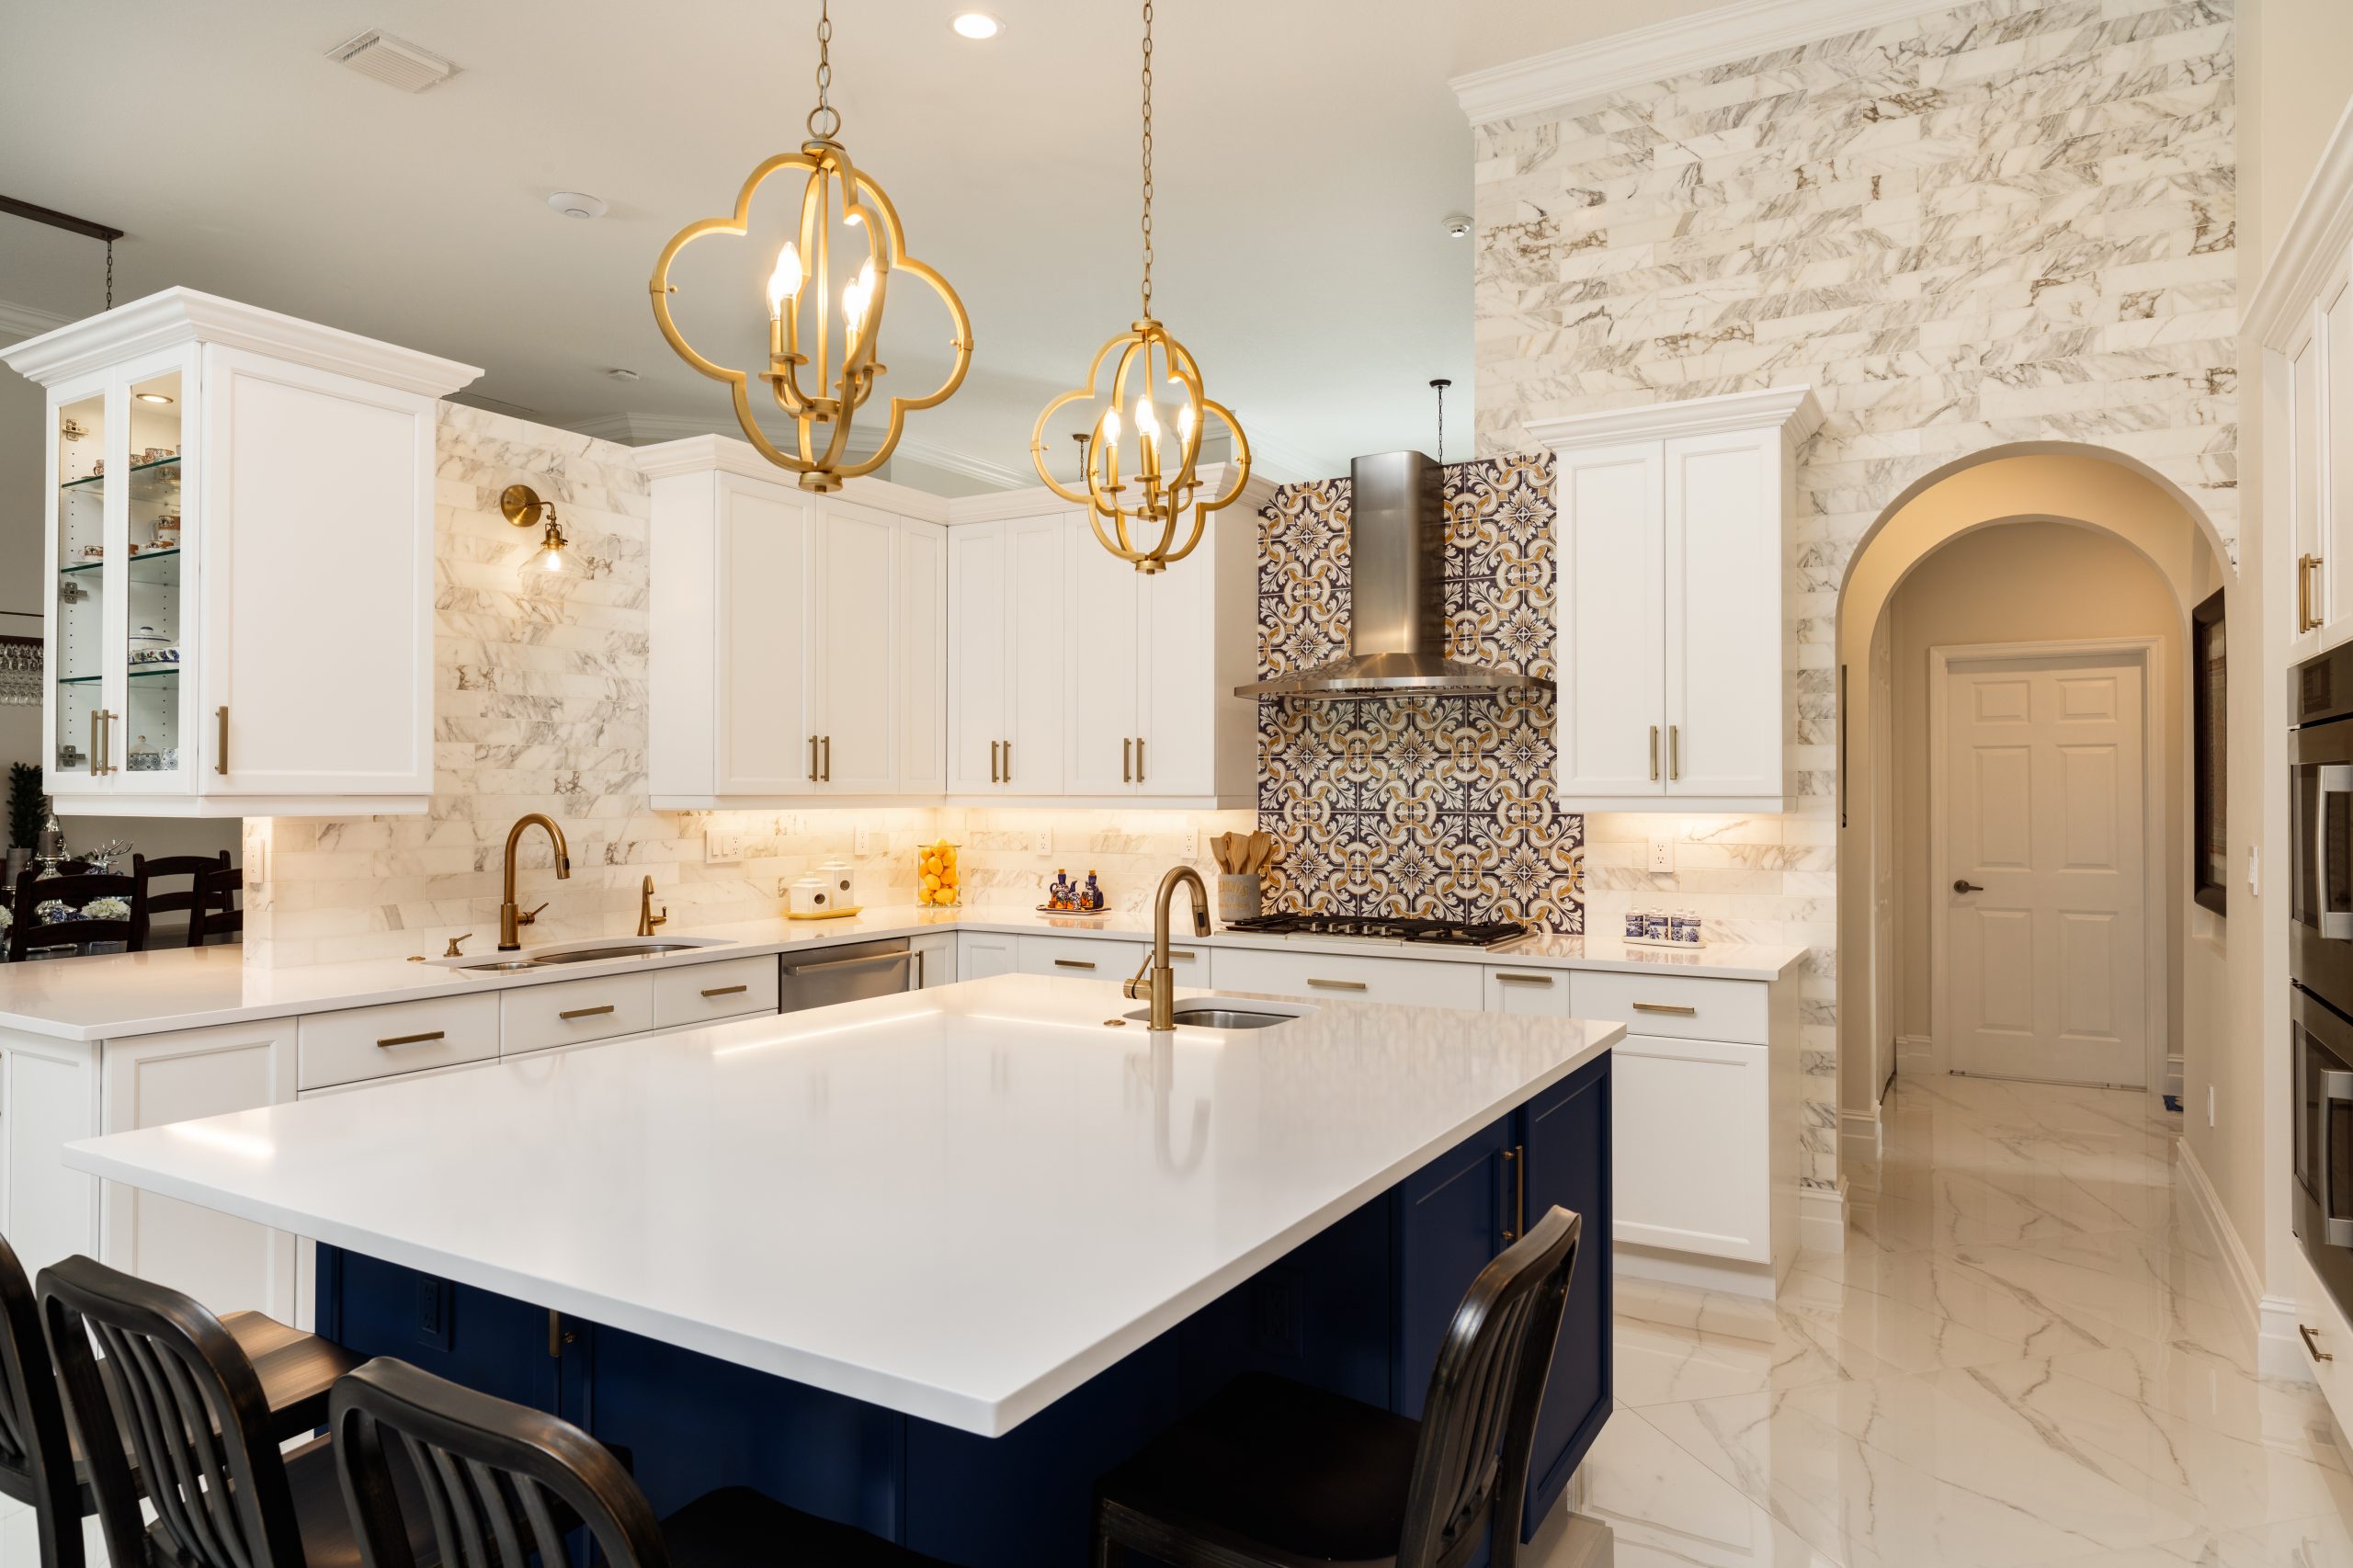 a kitchen with an arch entry way, marble pattern tiles and walls, gold design, white cabinets and countertop, and a kitchen island on top of blue cabinets